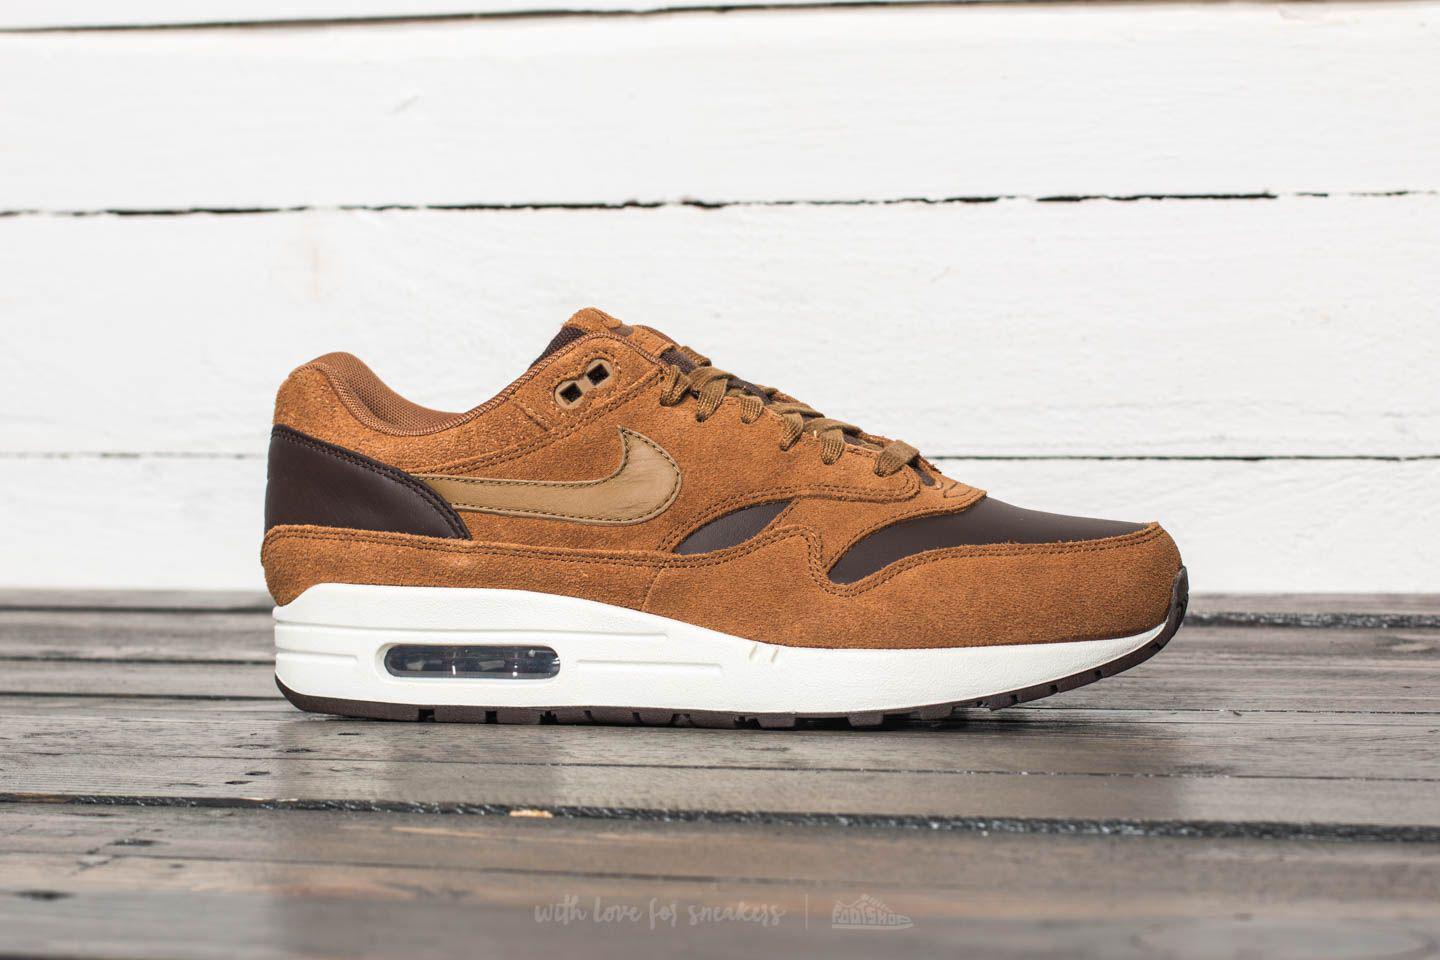 nike air max leather brown, Off 79%, www.scrimaglio.com